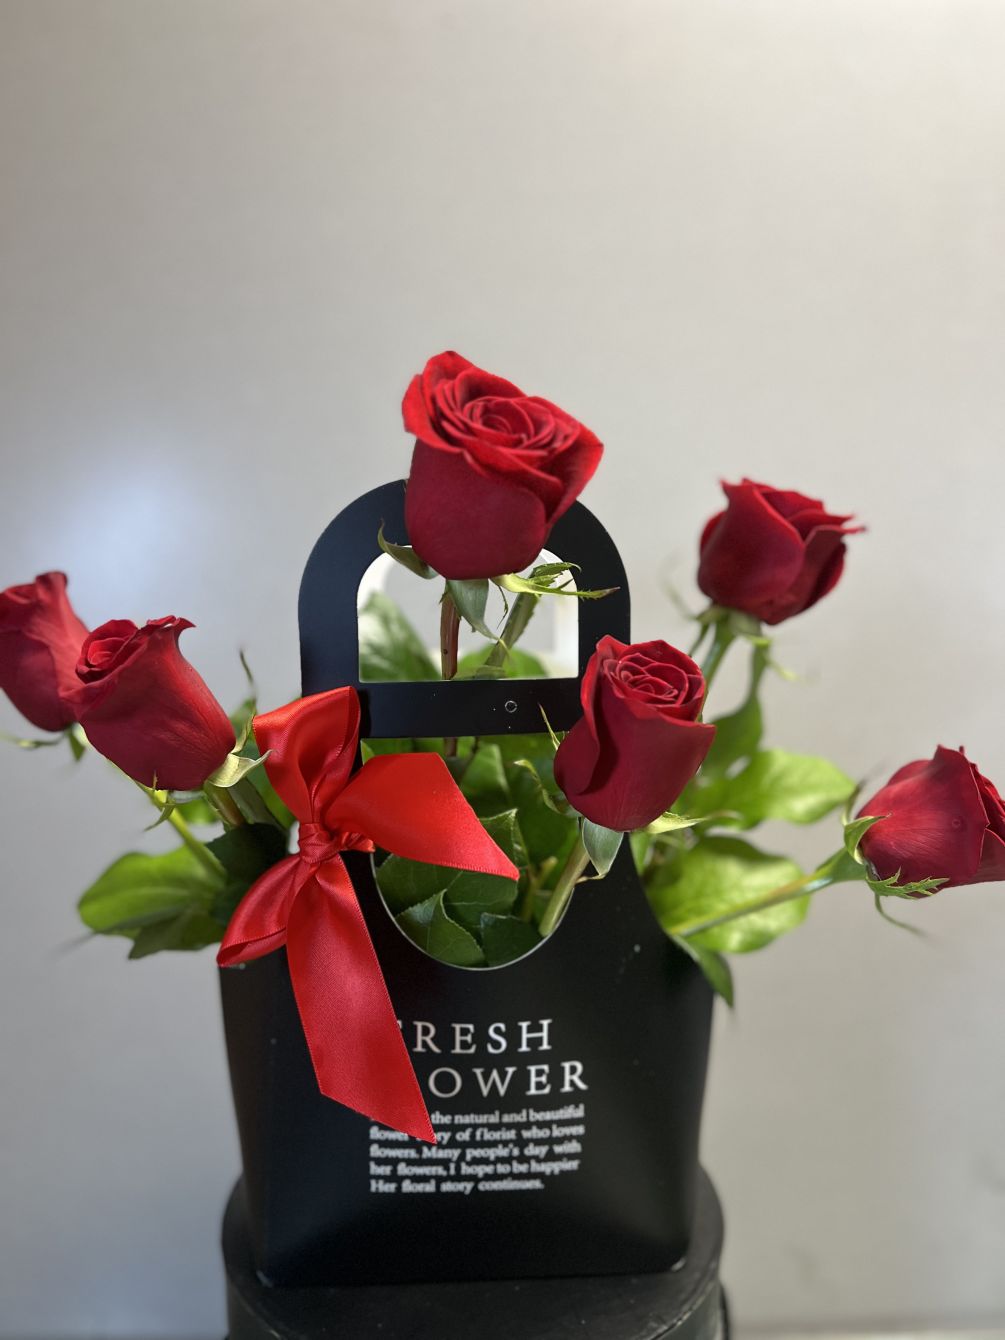 6 Stems Roses
AS SIMILAR AS POSSIBLE 
Substitution based on season, flowers availability